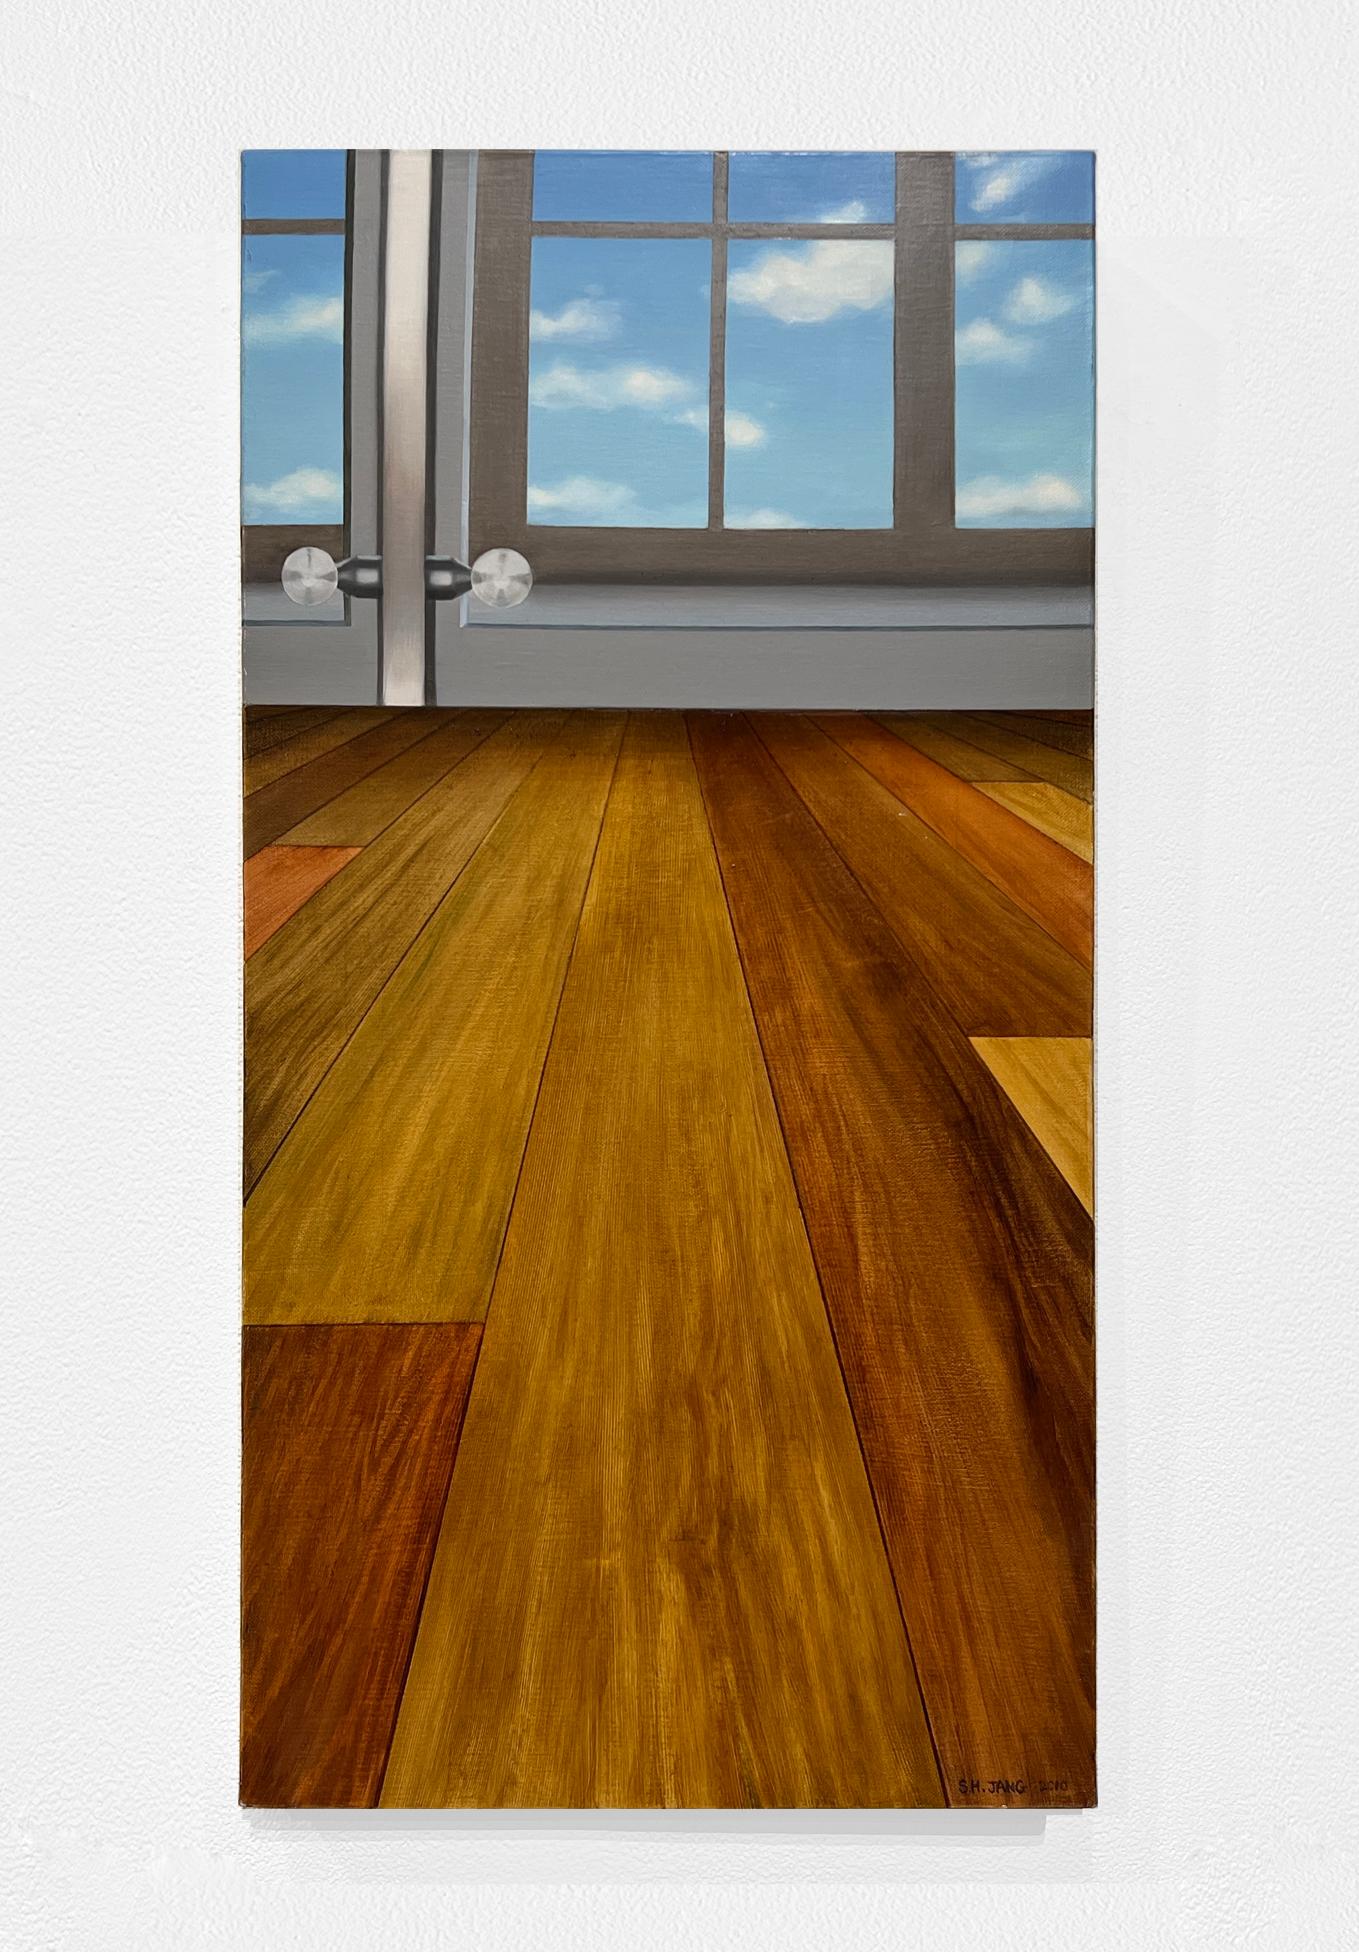 SKY IN LIVING ROOM - Contemporary Realism / Interior Scene with Window - Painting by Sunghee Jang